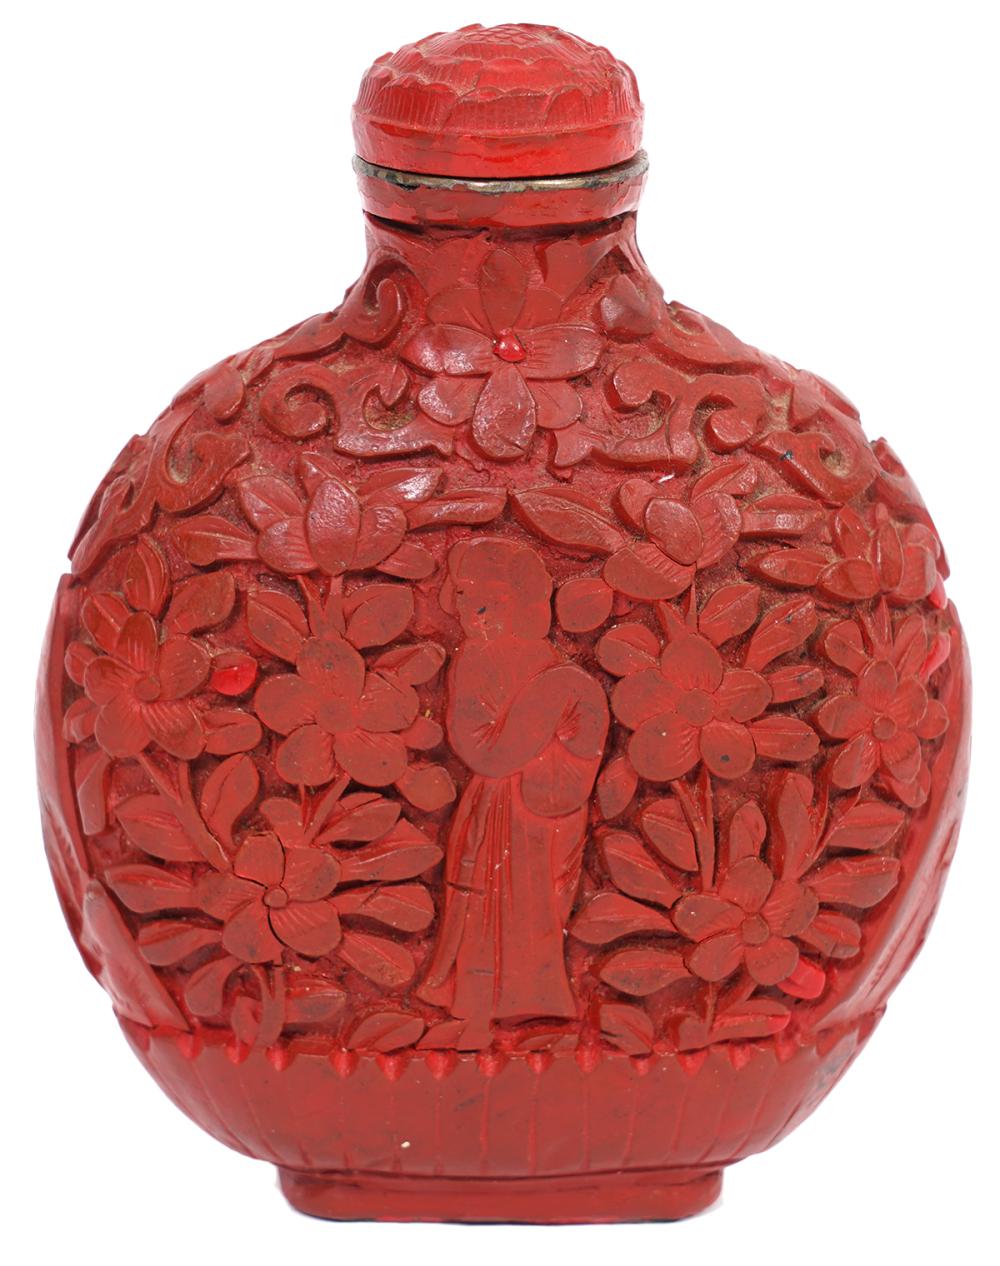 ANTIQUE CHINESE RED CINNABAR LACQUER 2cfff5